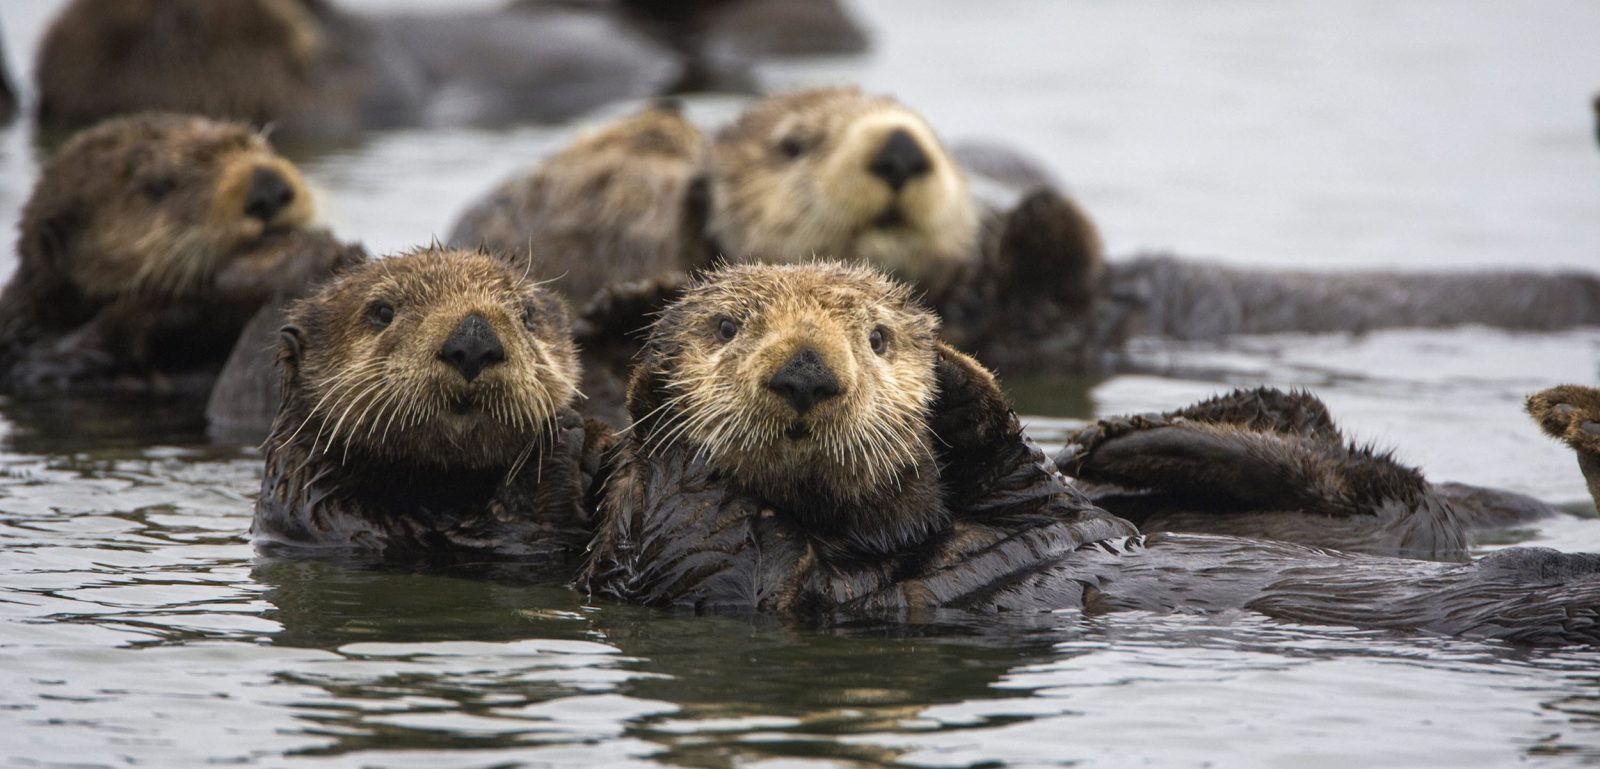 🦘 Even Wildlife Experts Can’t Get a Perfect Score on This Animal Quiz — Can You? Header Car Tire Otters